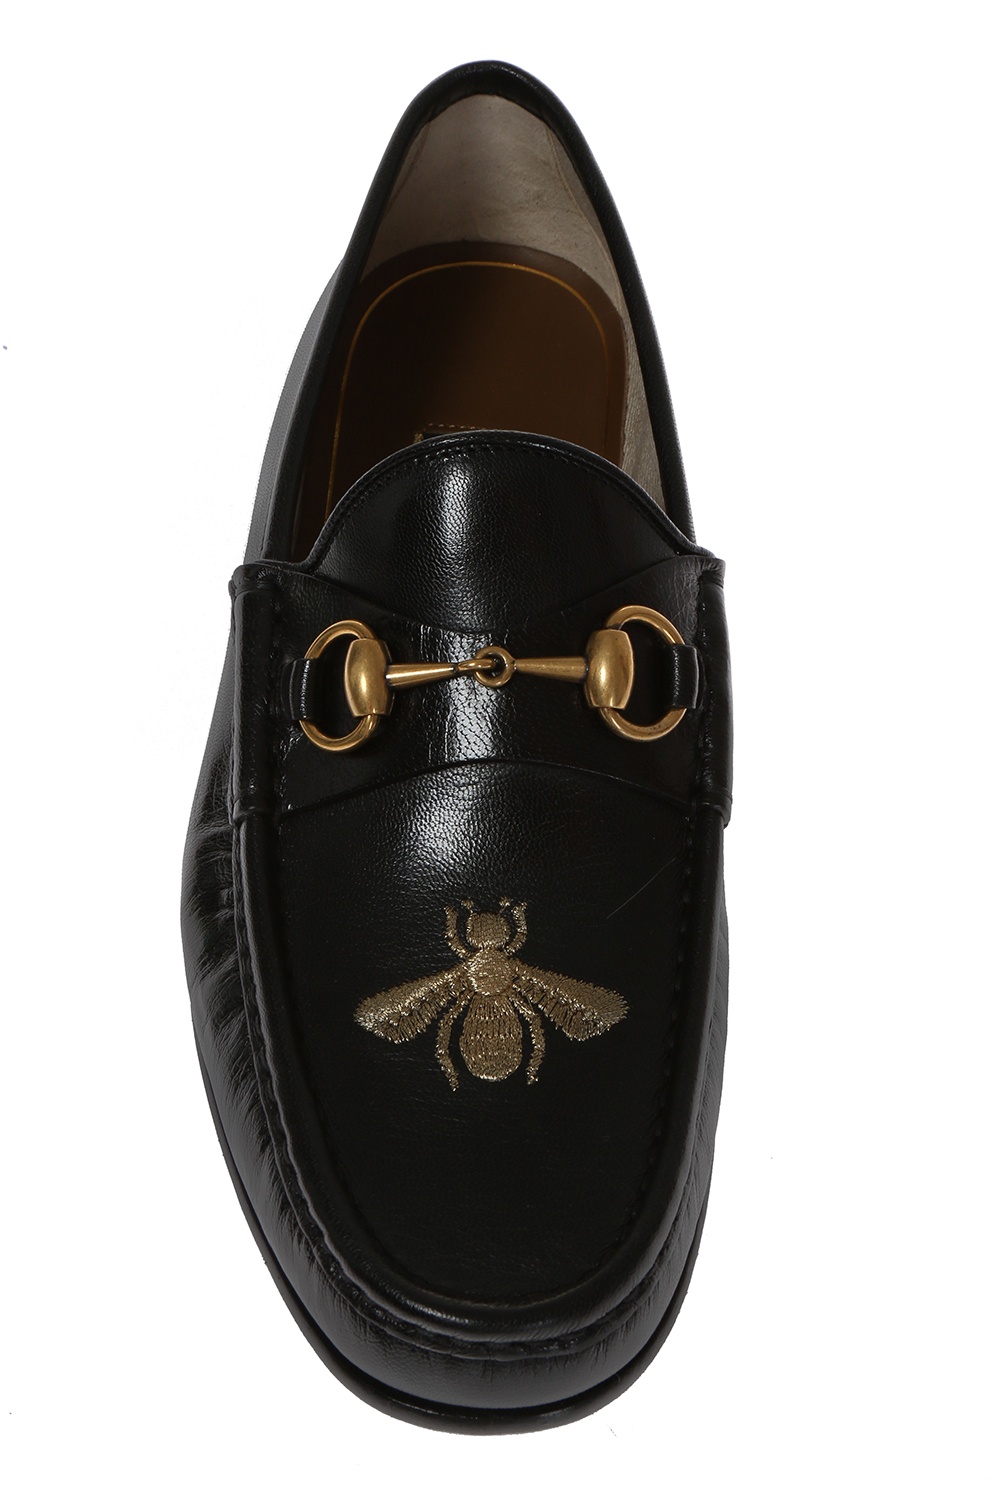 gucci loafer bee